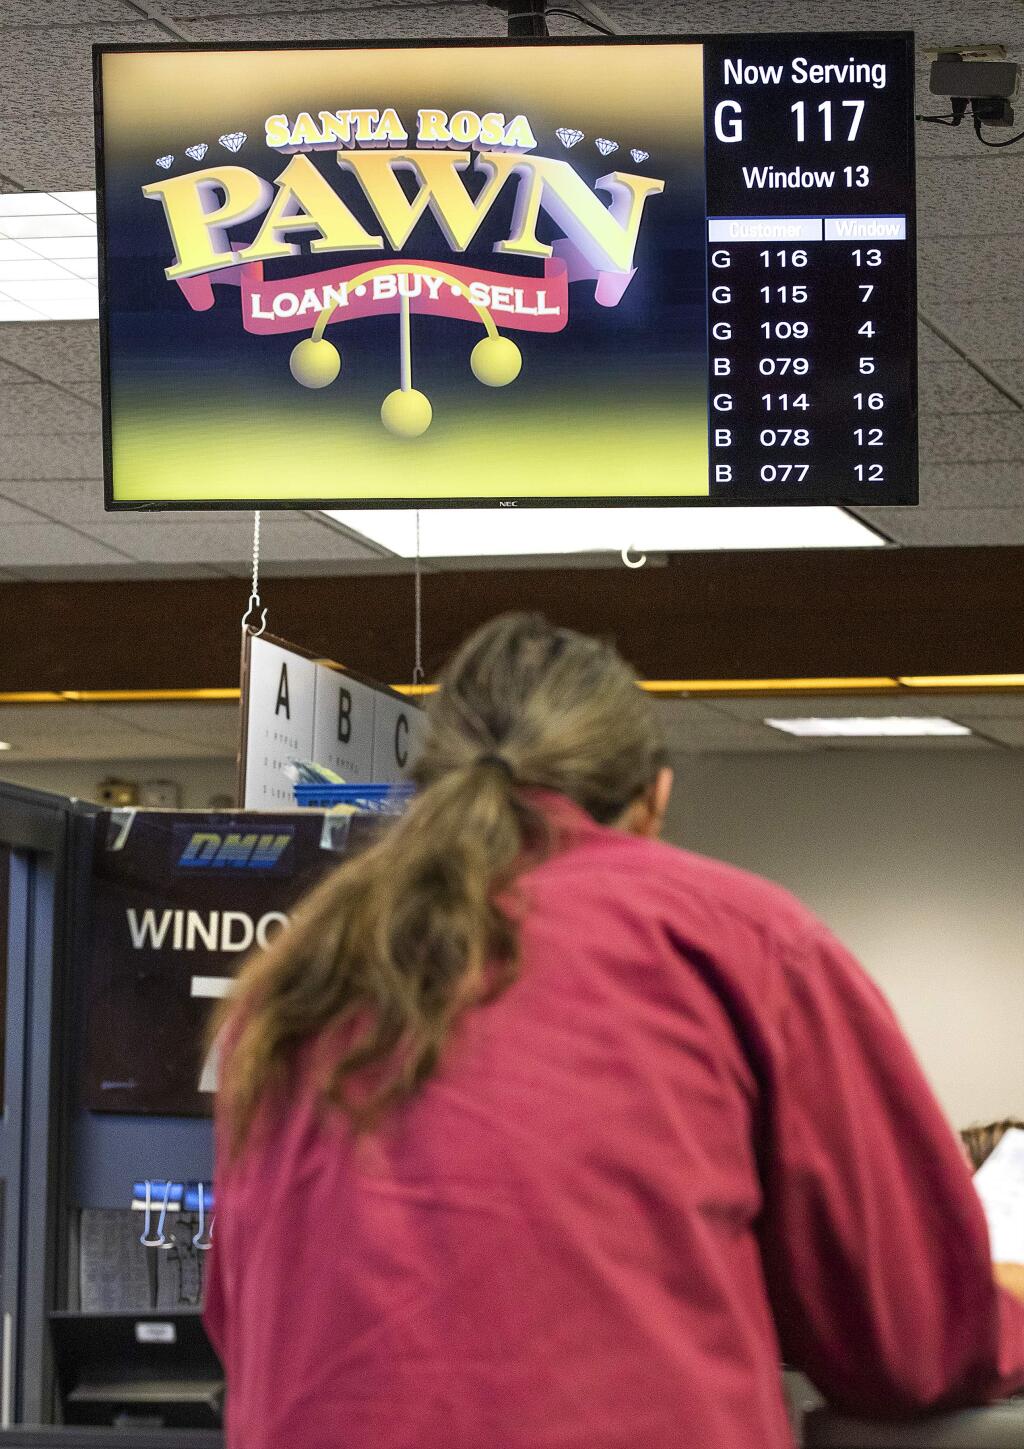 The Motor Vehicle Network, a non-governmental business, brings in hundreds of thousands of dollars for advertising next to customer numbers on television screens at DMV offices across the state including the Santa Rosa office. (photo by John Burgess/The Press Democrat)